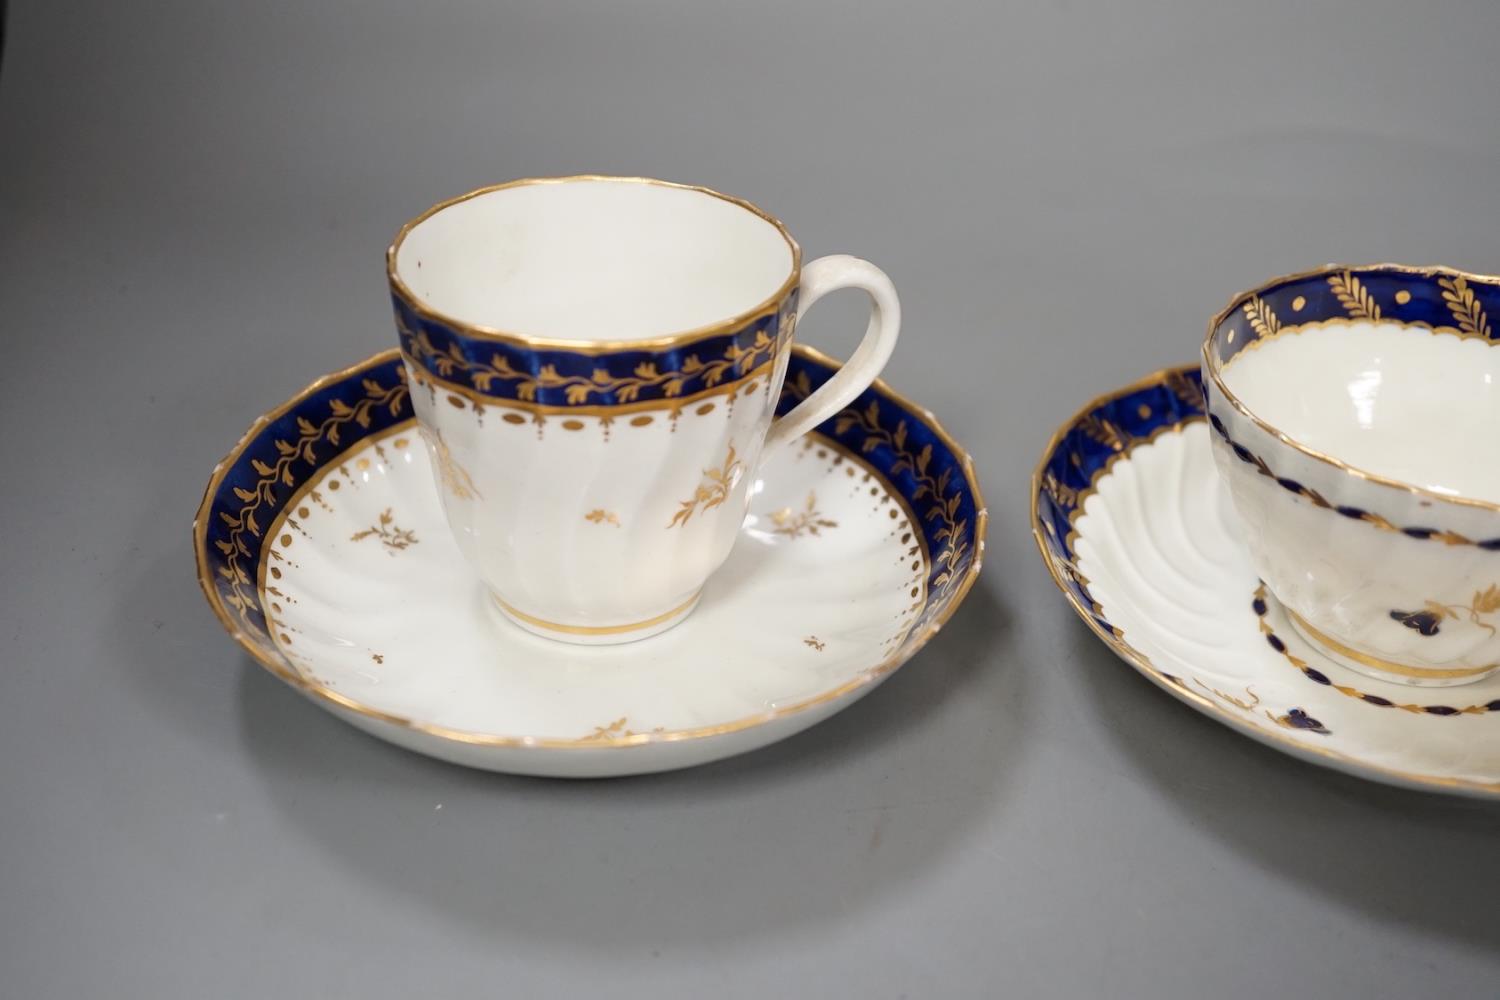 Three flight Worcester shankered teawares two coffee cup and saucers with blue borders and a teabowl - Image 2 of 14